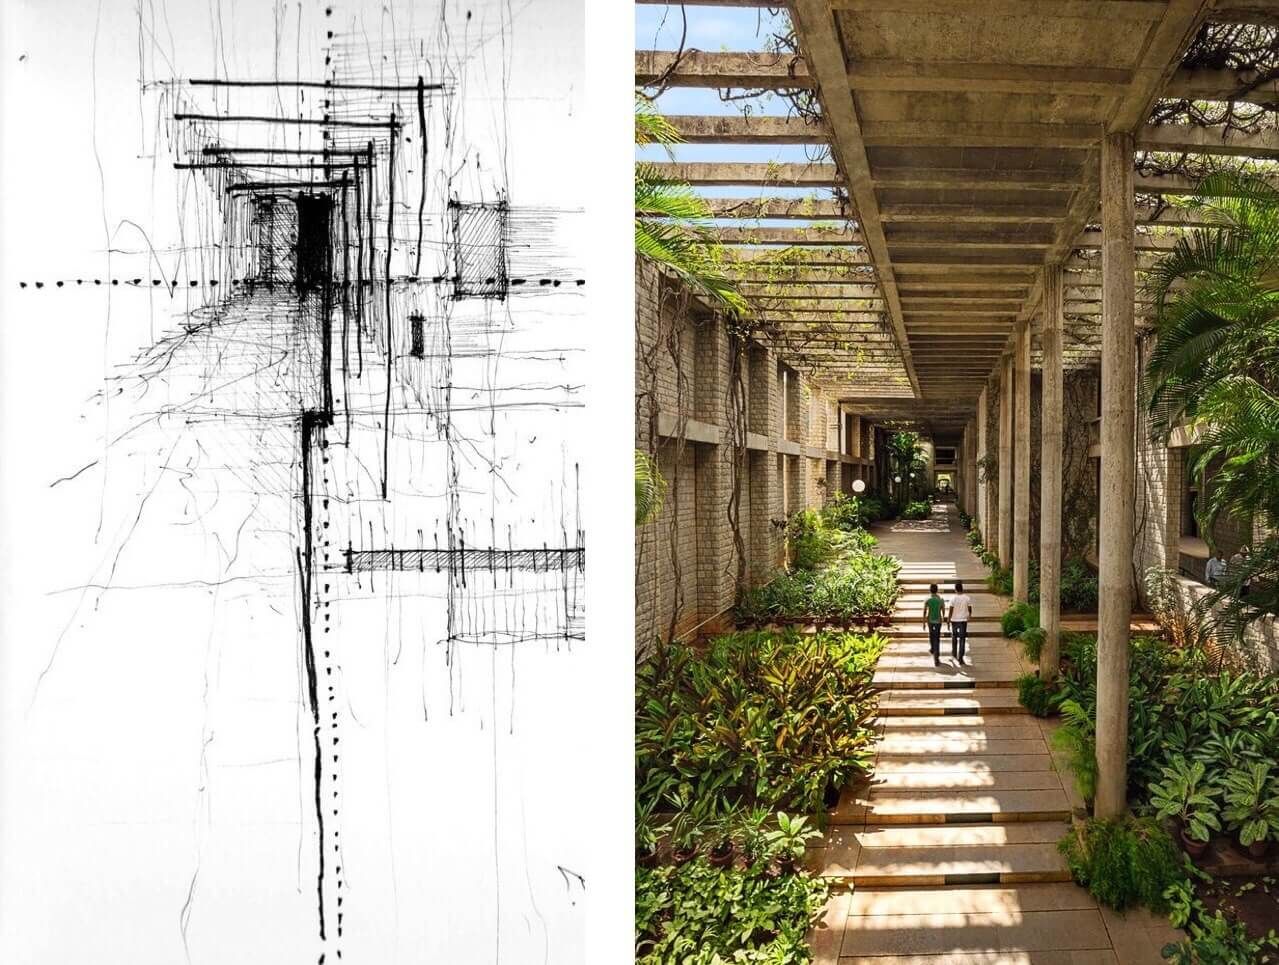 A sketch & a view of the IIM, Bangalore